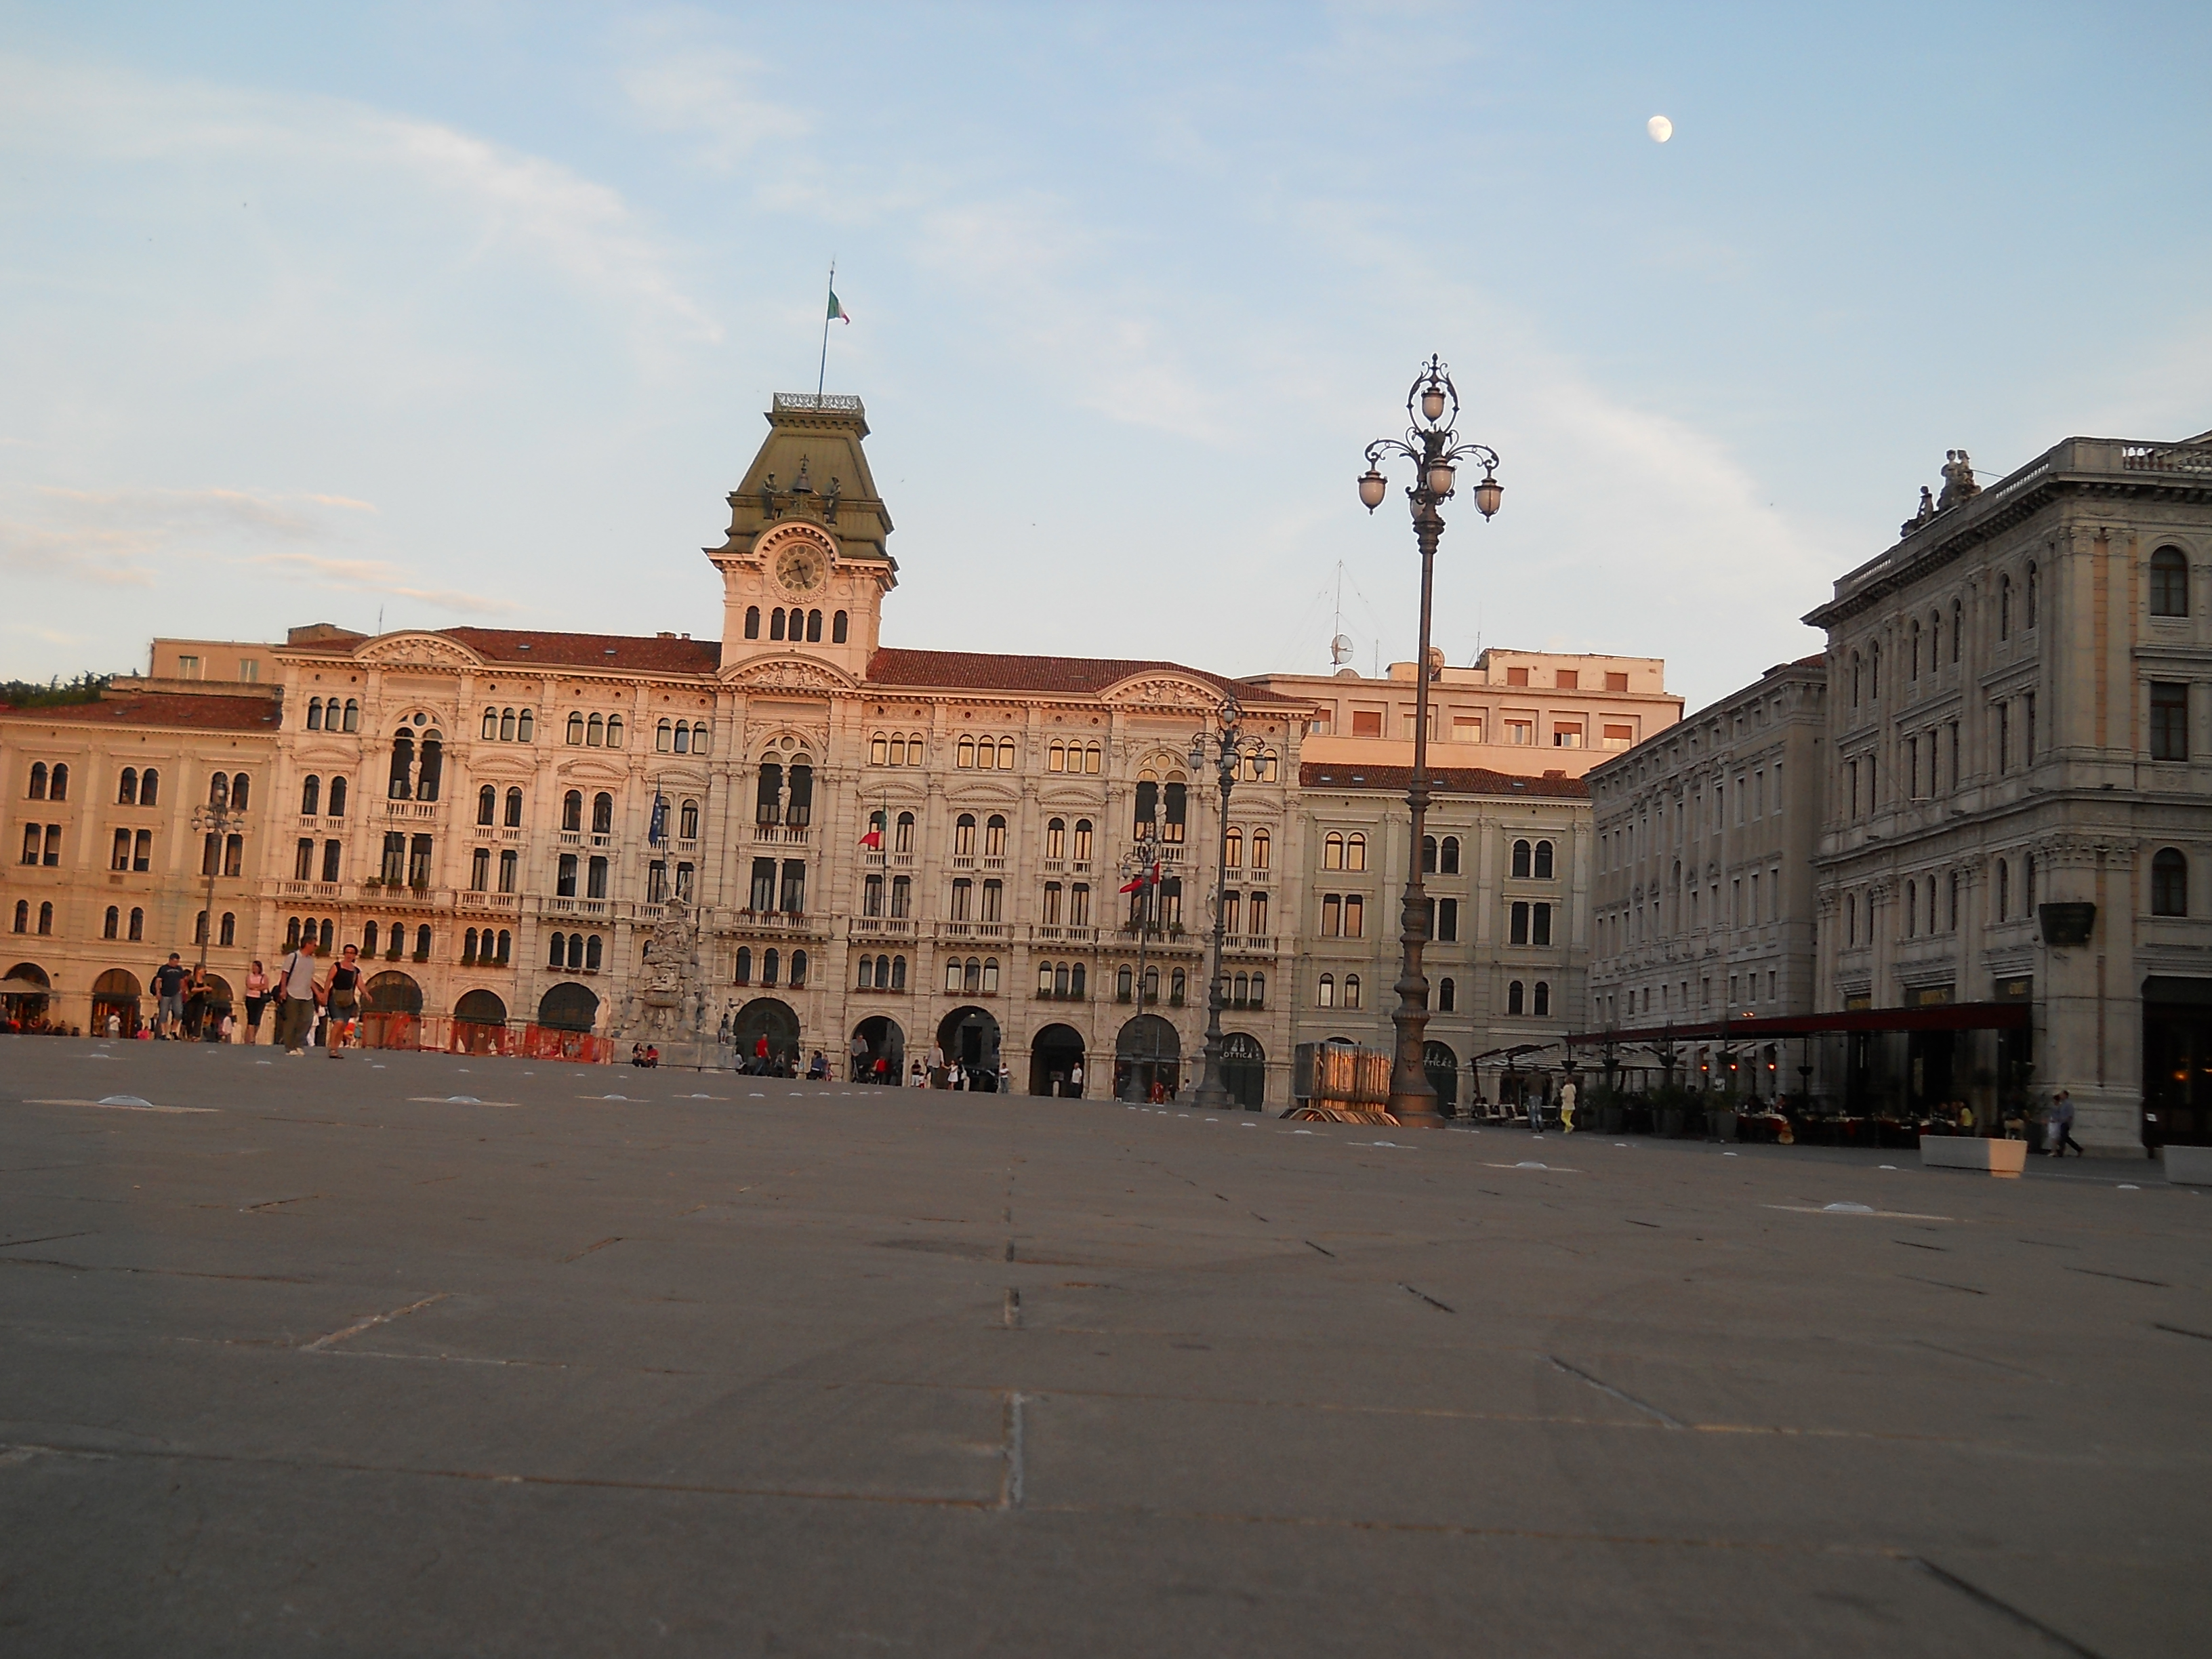 Trieste's stunning Place Unit? d'Italia monument, captured in a desktop wallpaper by mikevero.